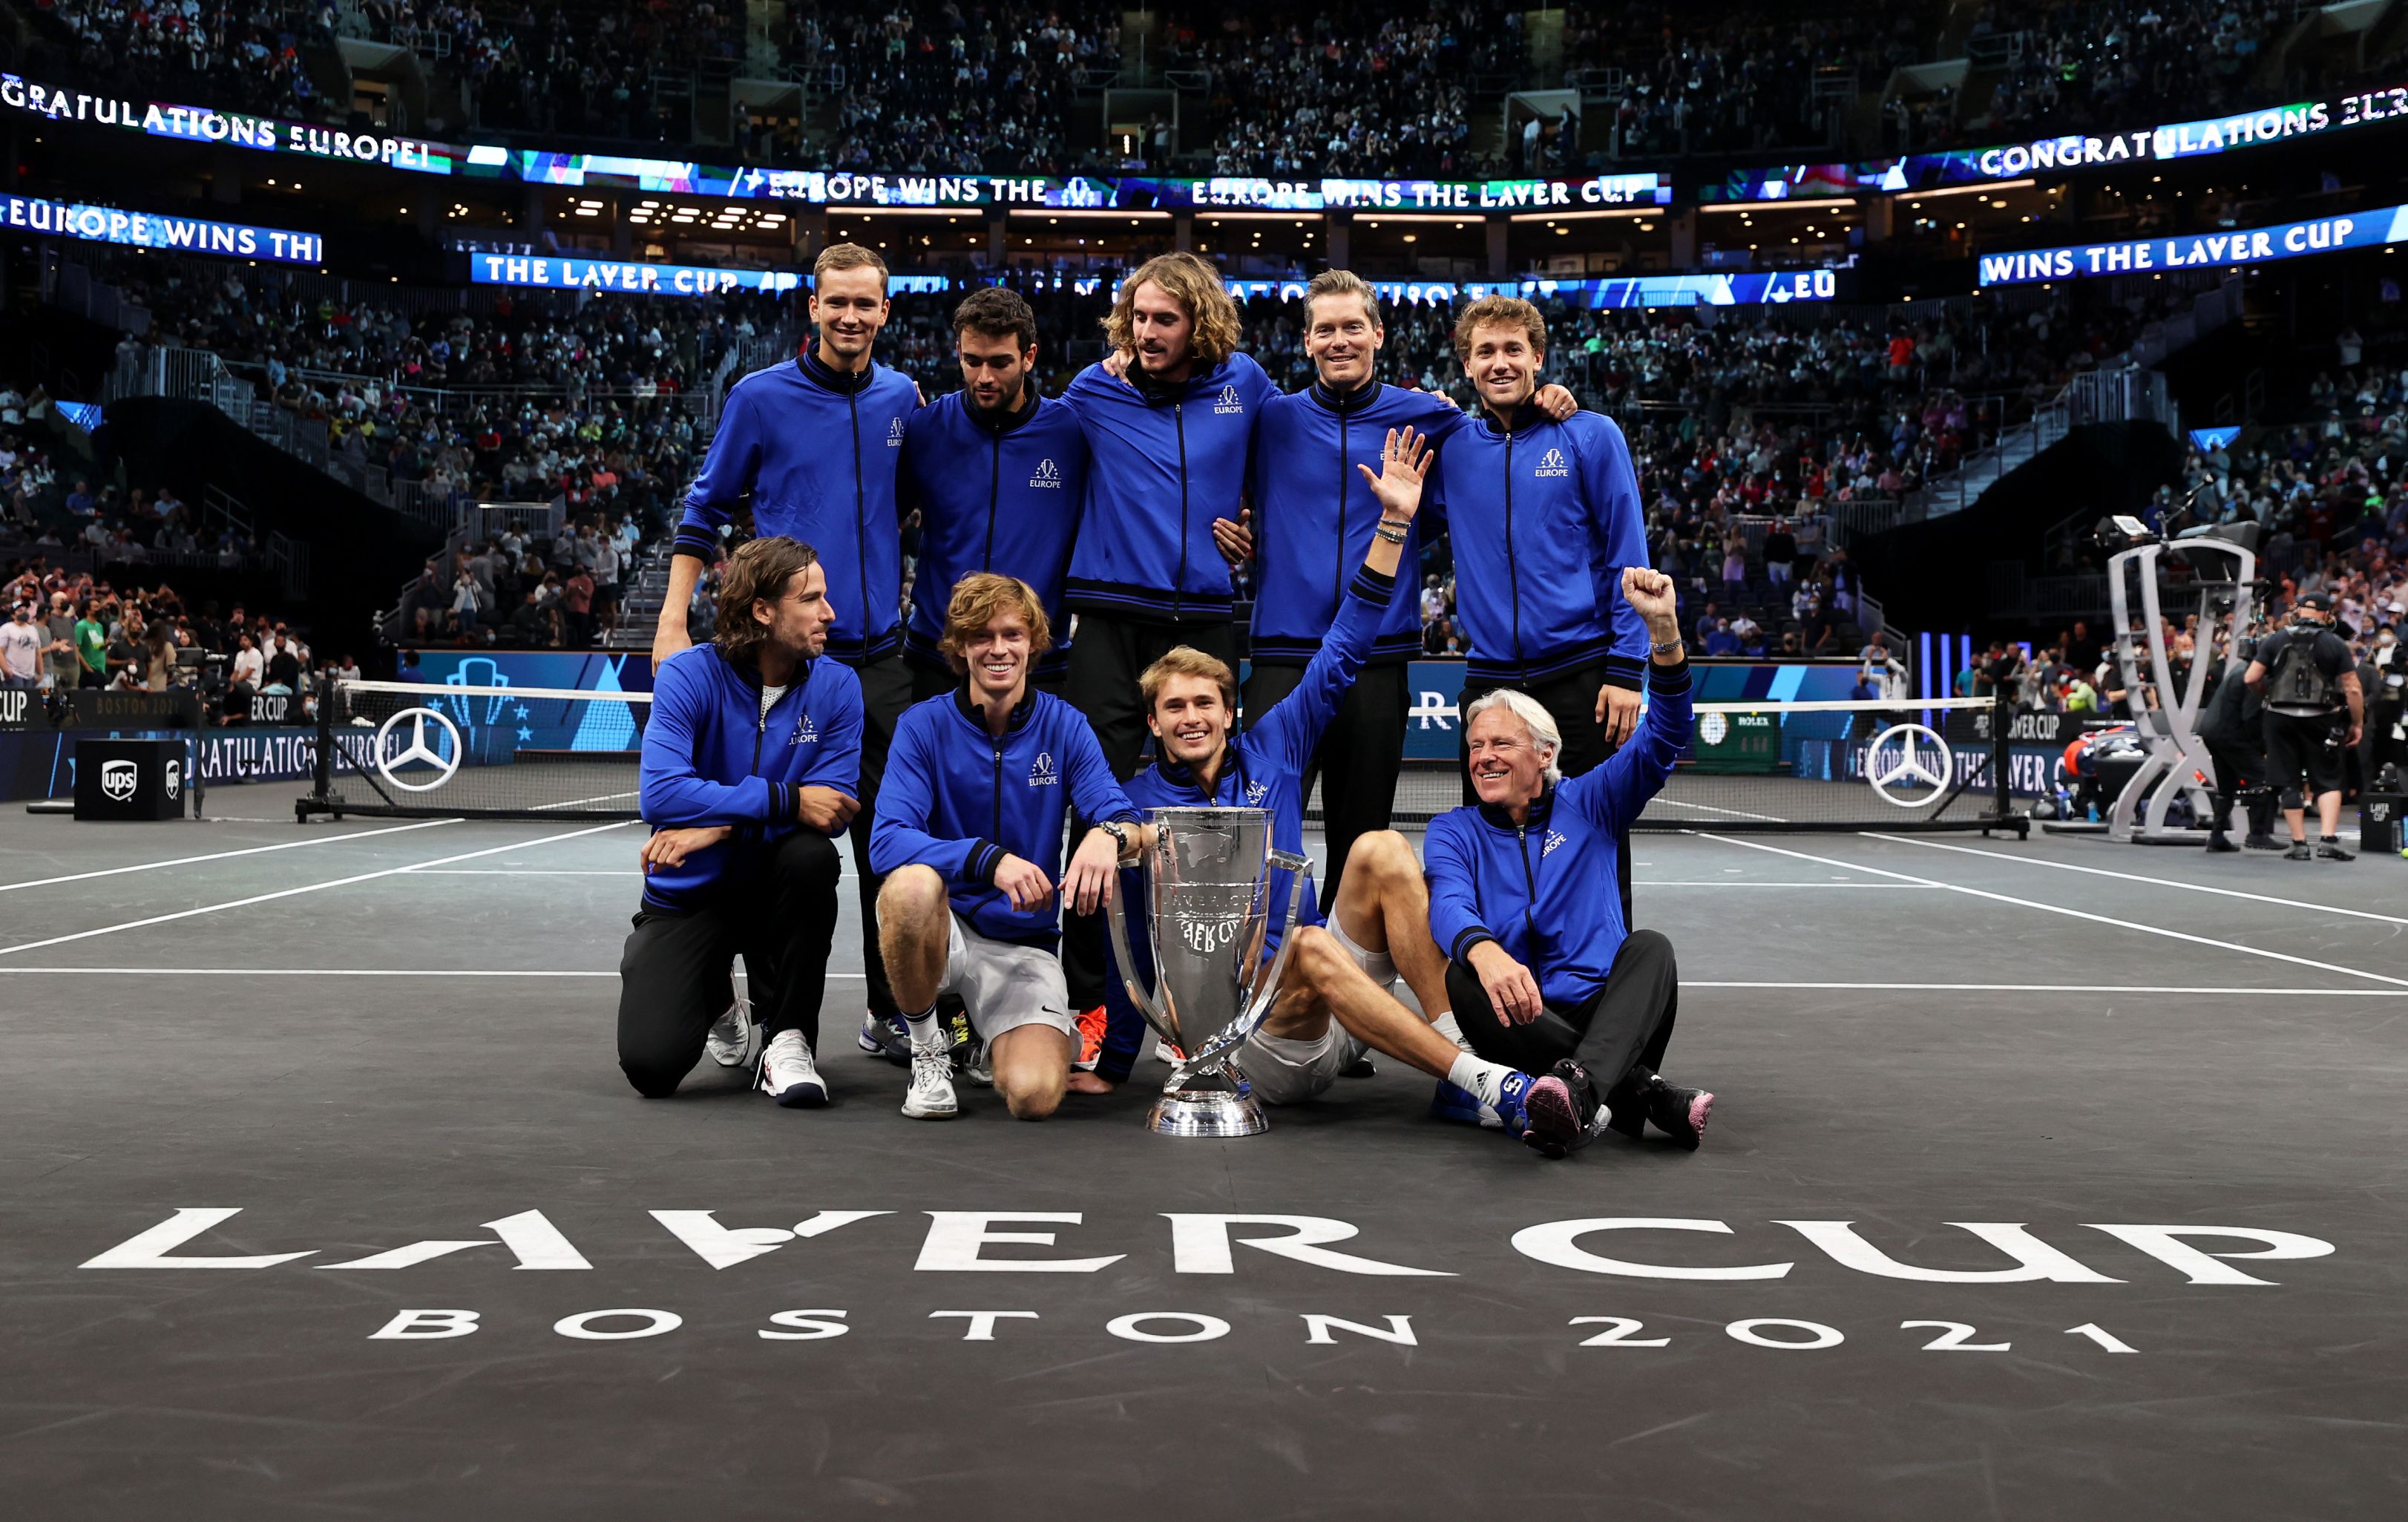 Laver Cup Open Practice Day to welcome fans and raise funds for charity LTA